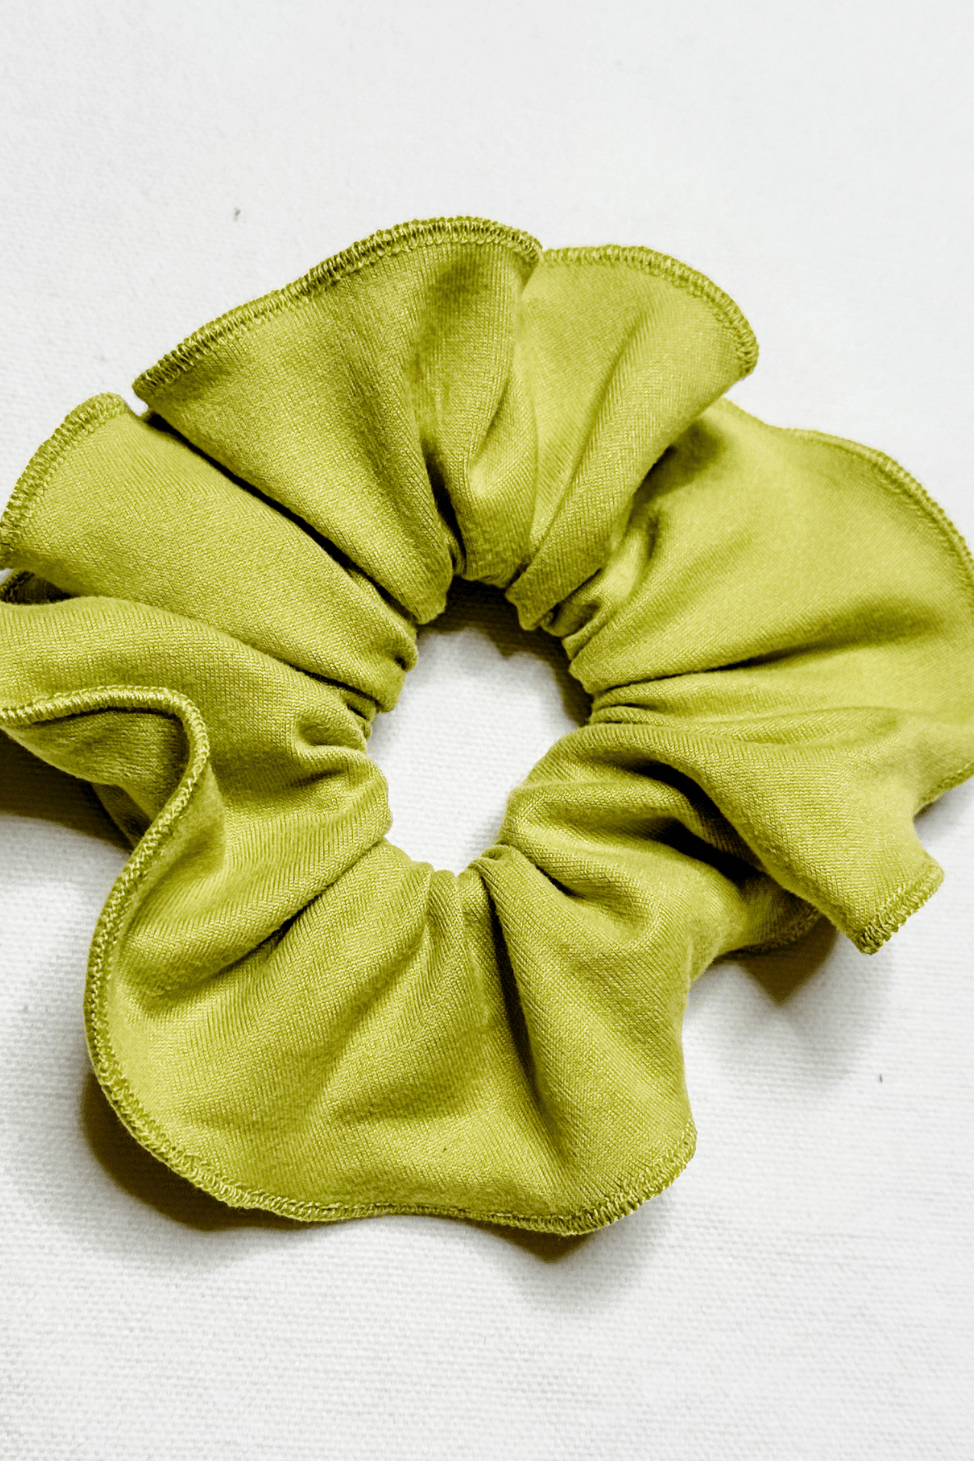 Scrunchie in Chartreuse color from Diane Kroe